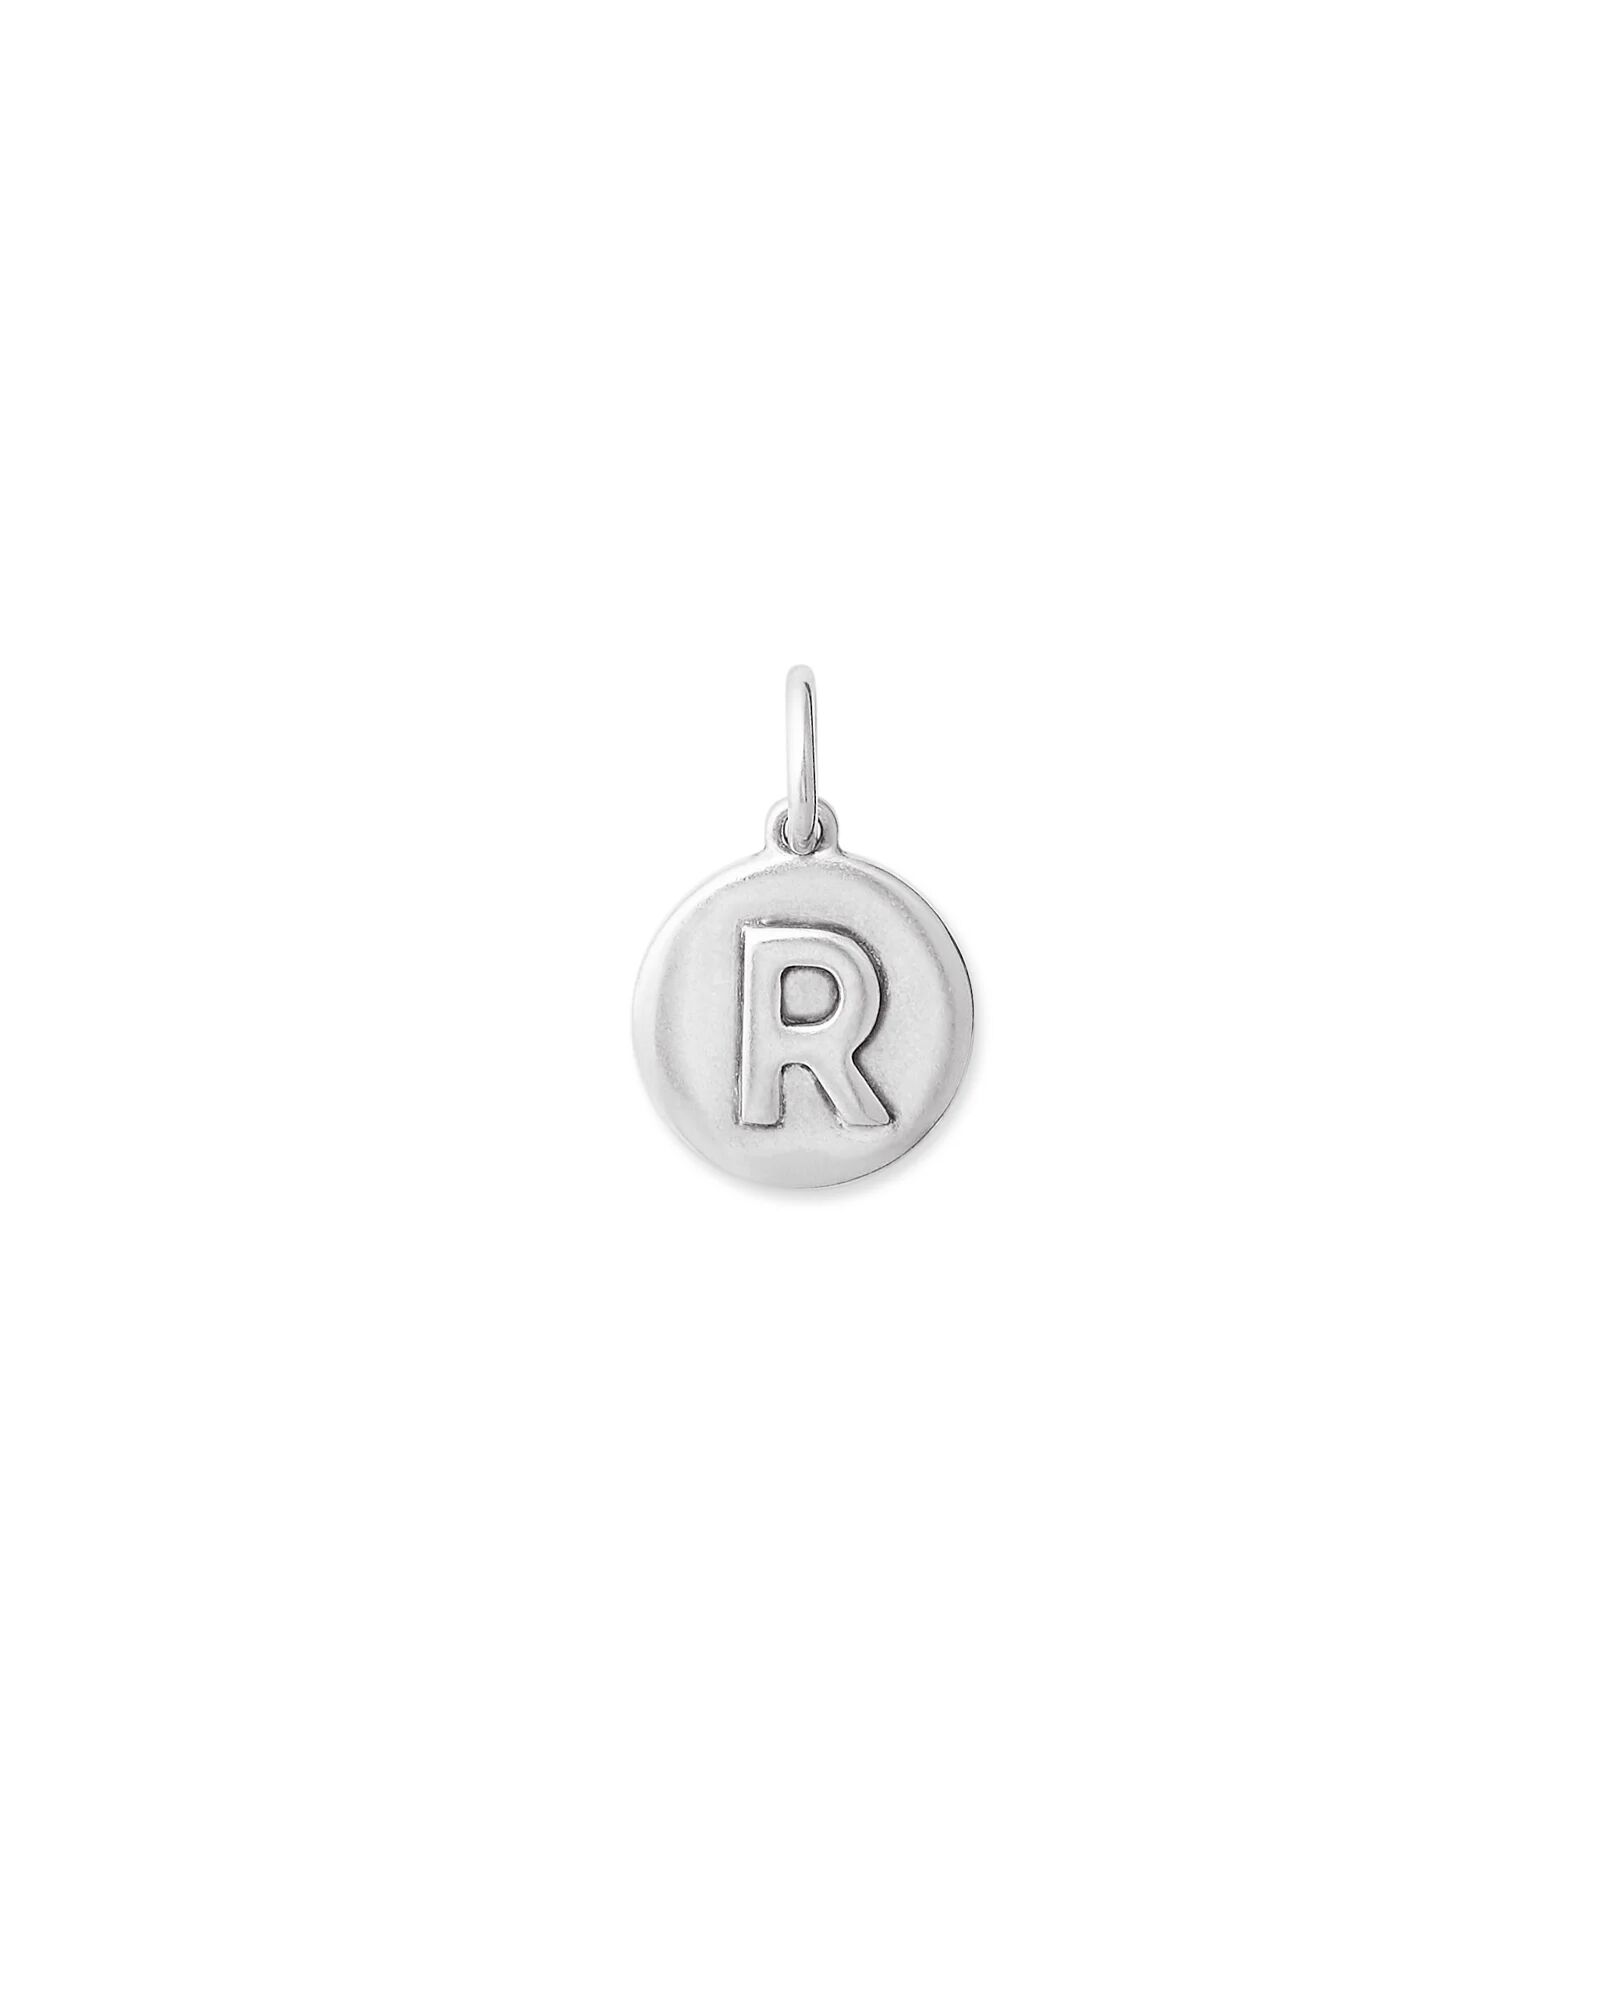 Kendra Scott Letter R Coin Charm in Oxidized Sterling Silver   Metal